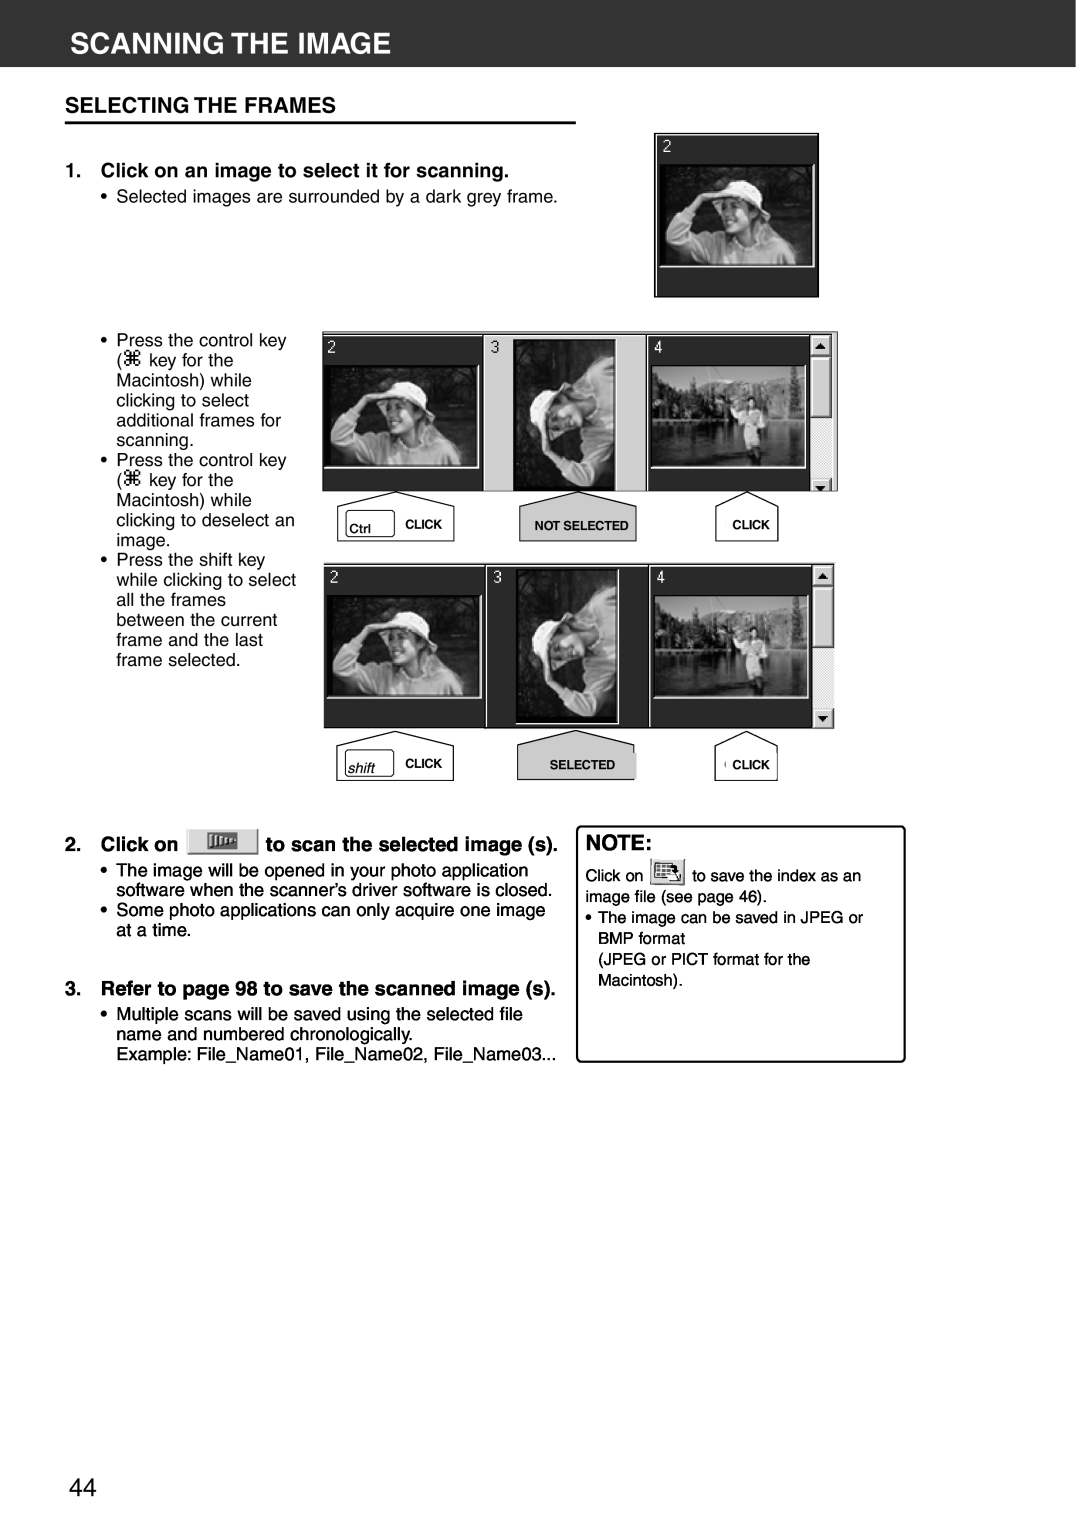 Konica Minolta Scan Multi PRO Scanning The Image, Selecting The Frames, Click on an image to select it for scanning 